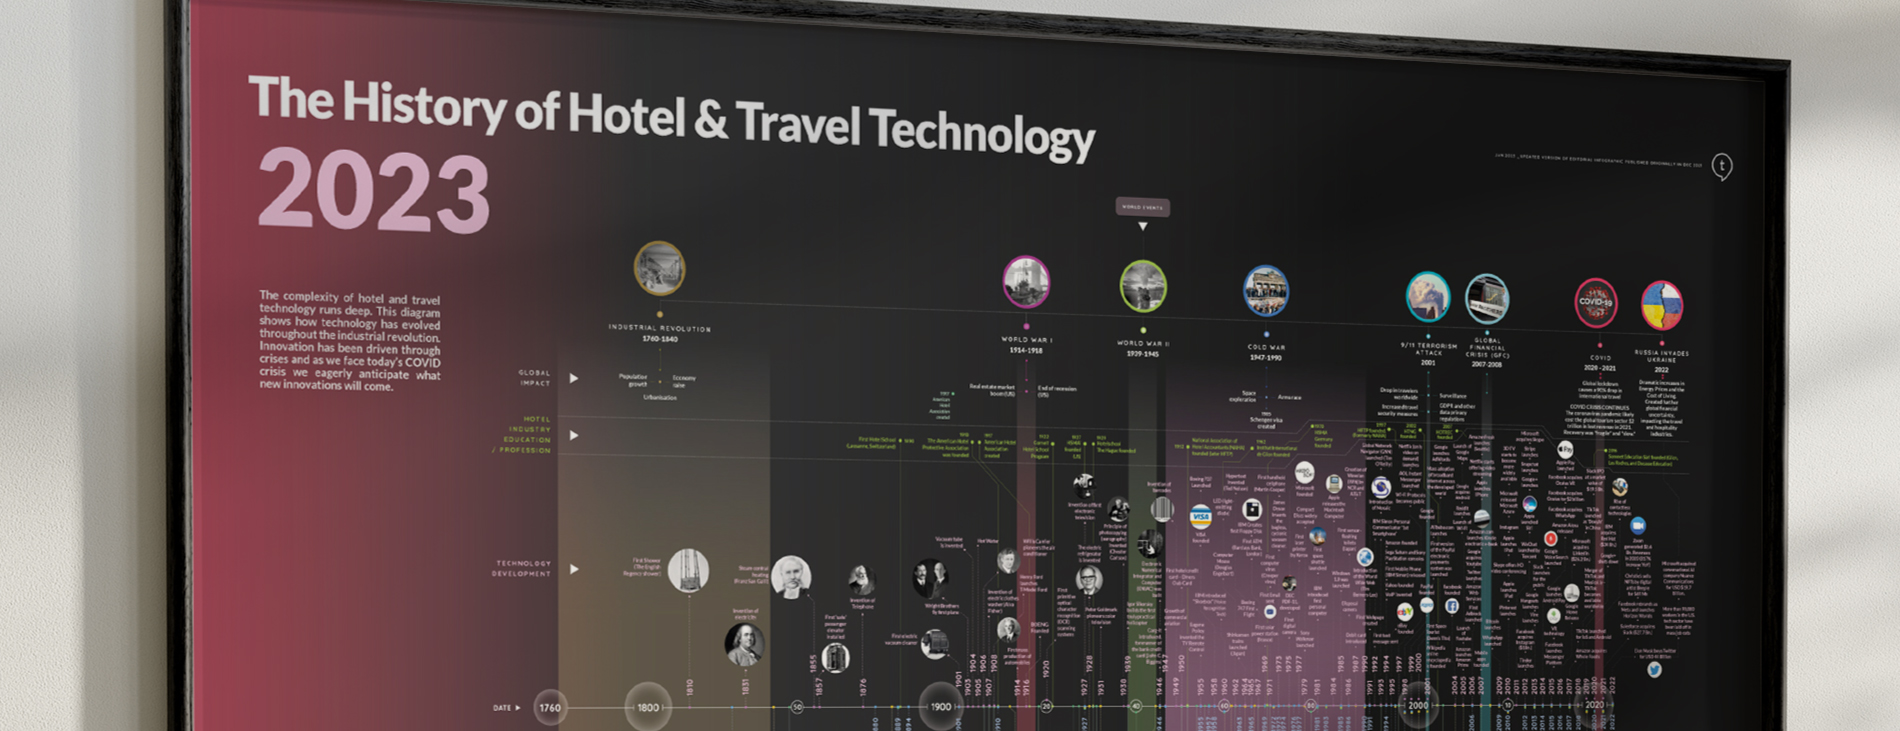 [Updated] Infographic | The History of Hotel & Travel Technology, Timeline